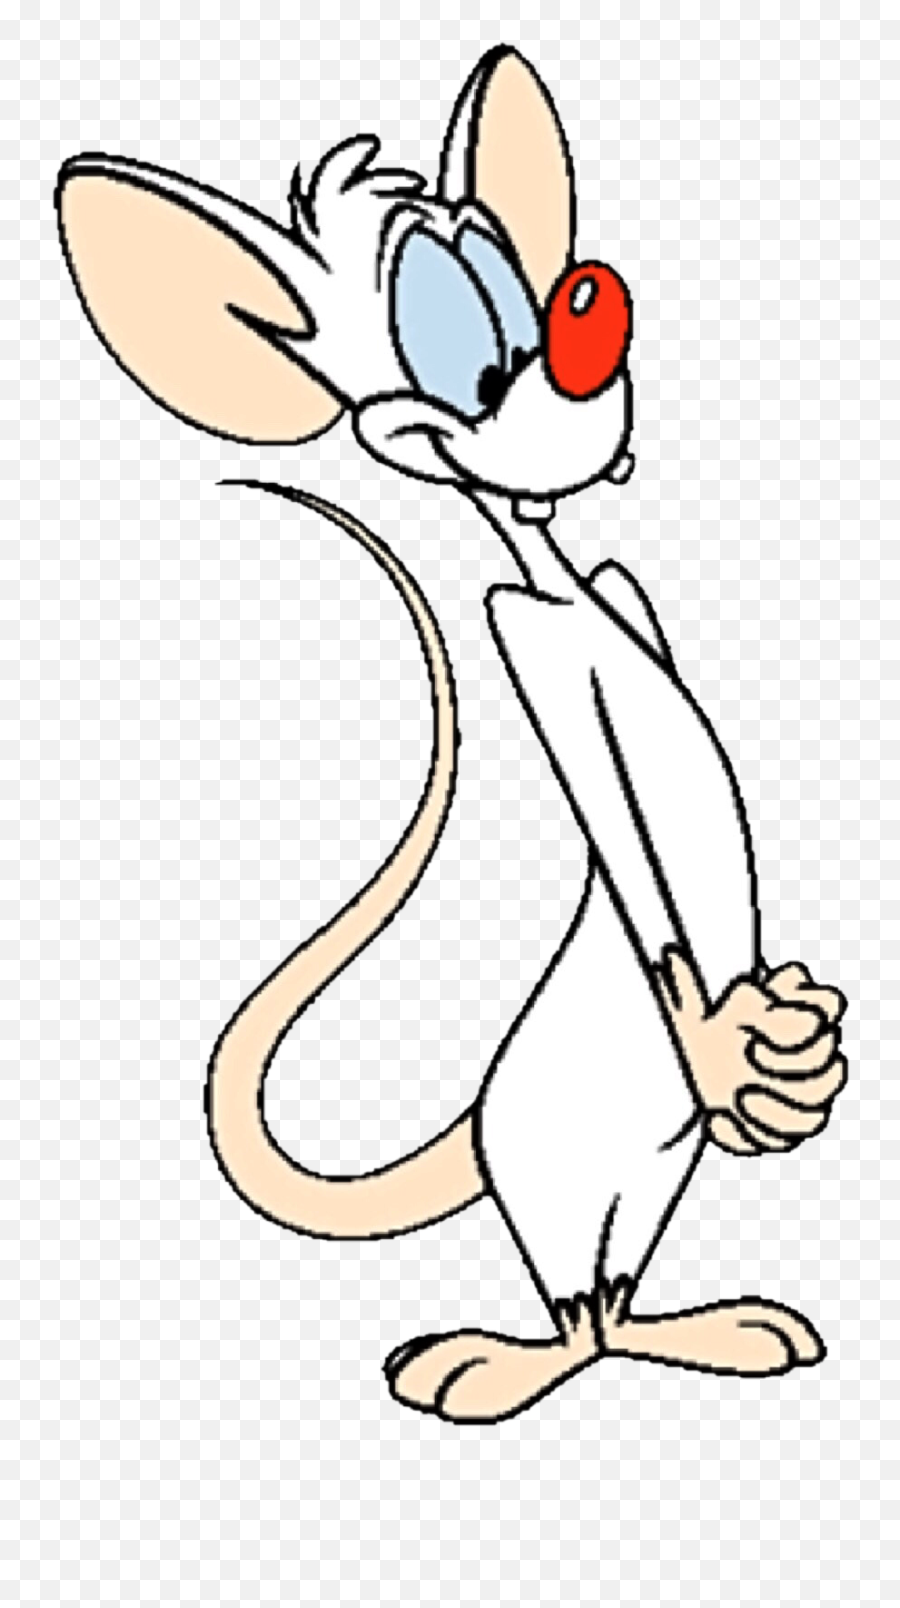 Pinky - Pinky From Pinky And The Brain Png,Cartoon Brain Png